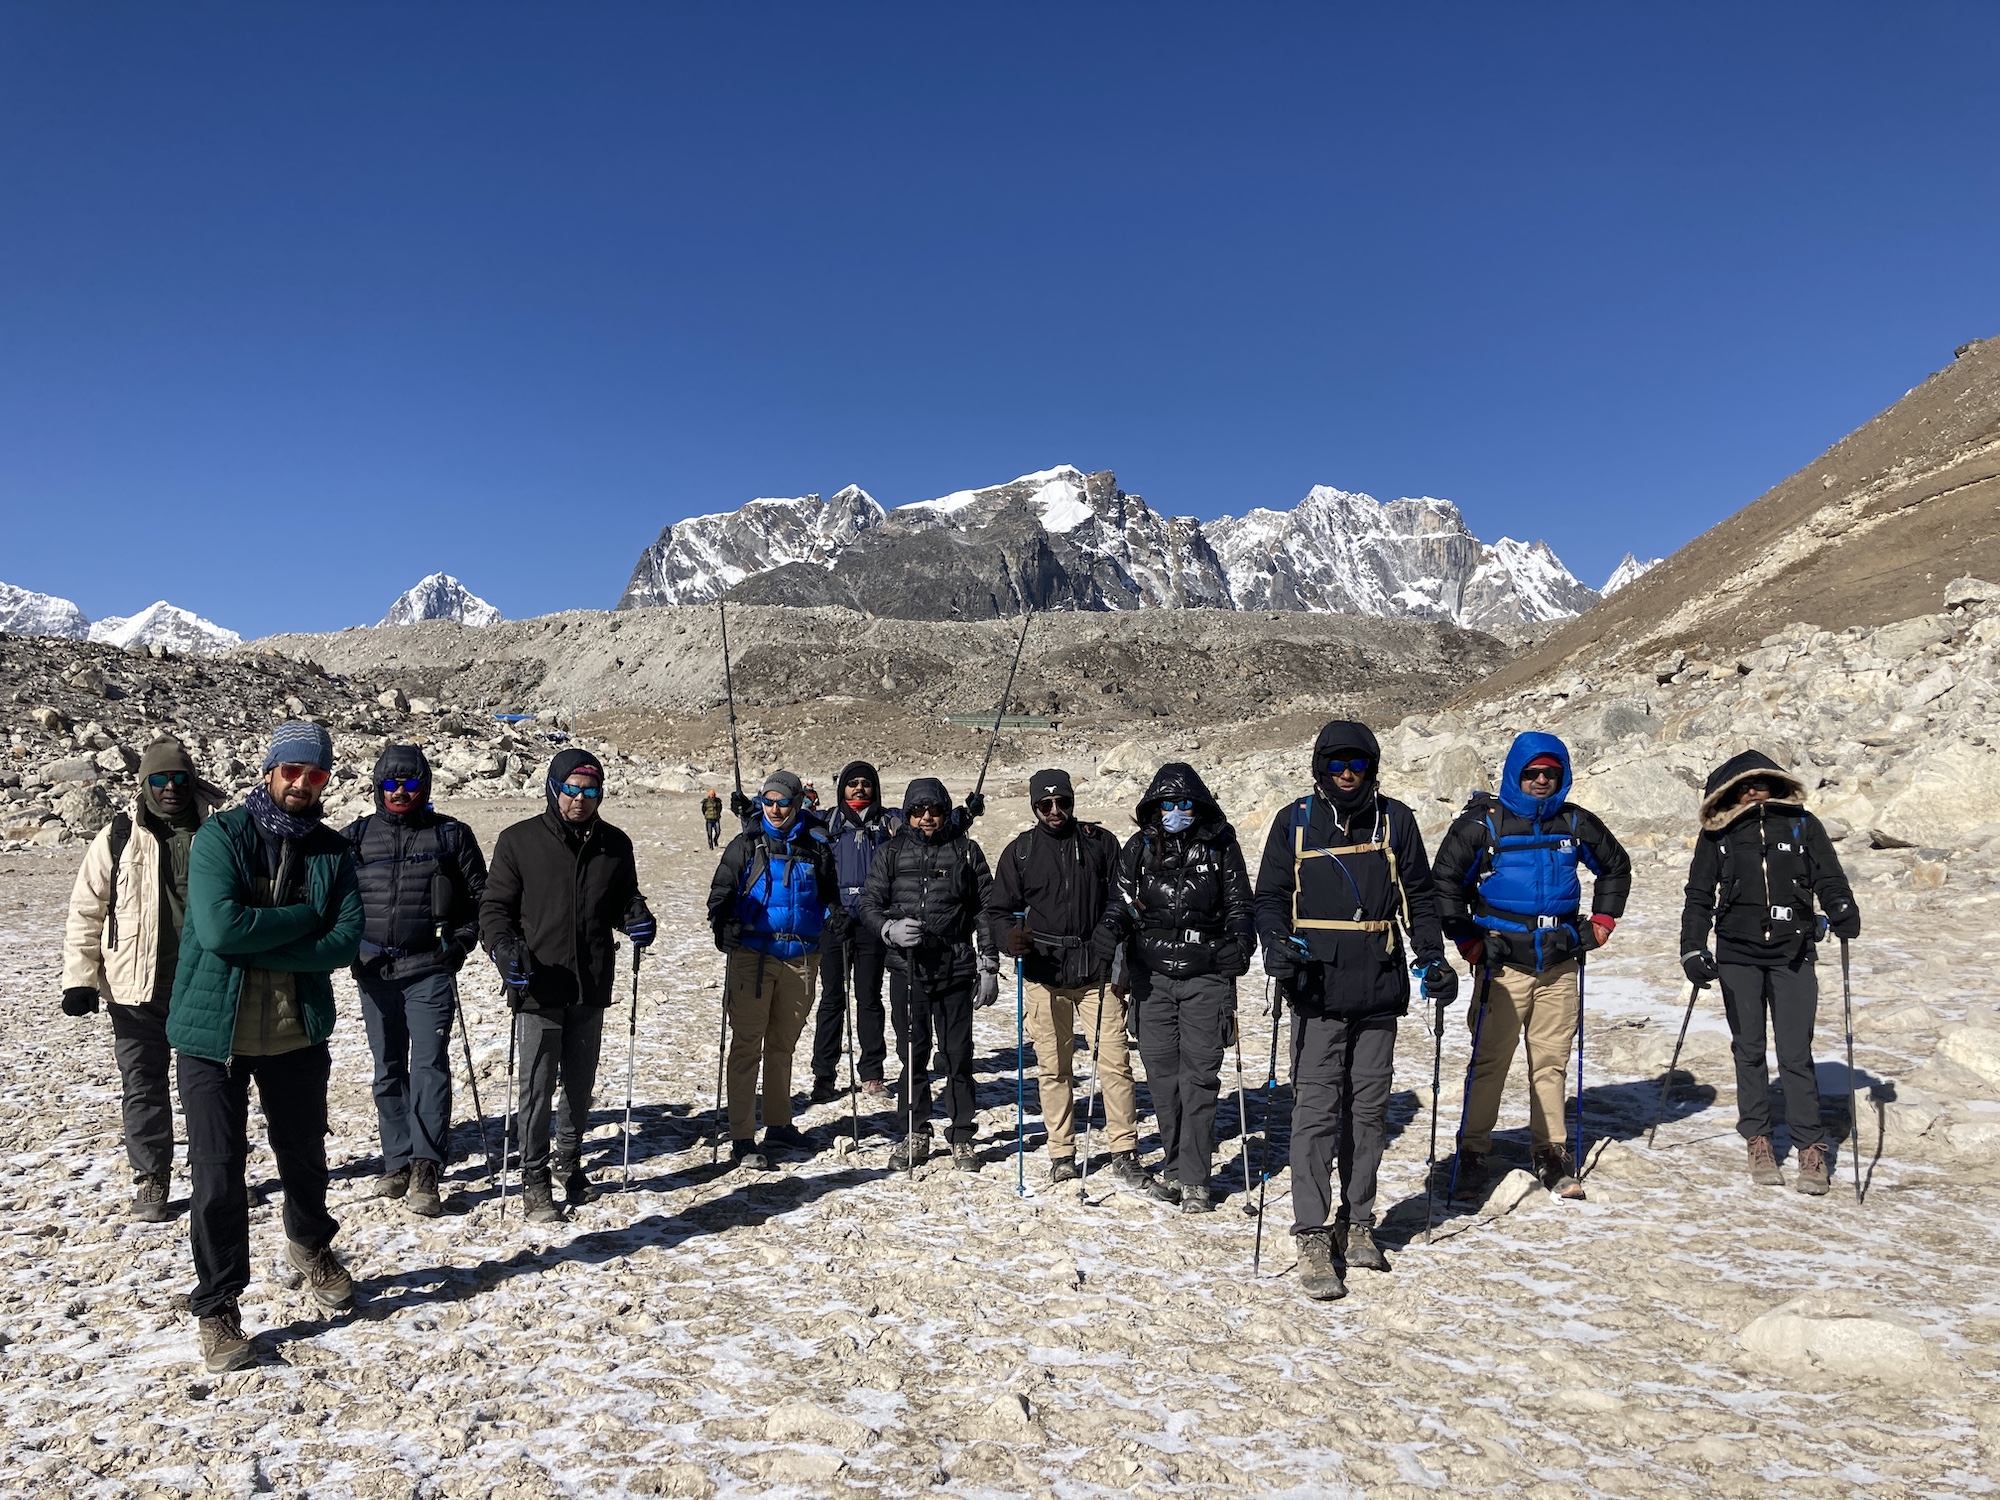 Trekking in Nepal with group